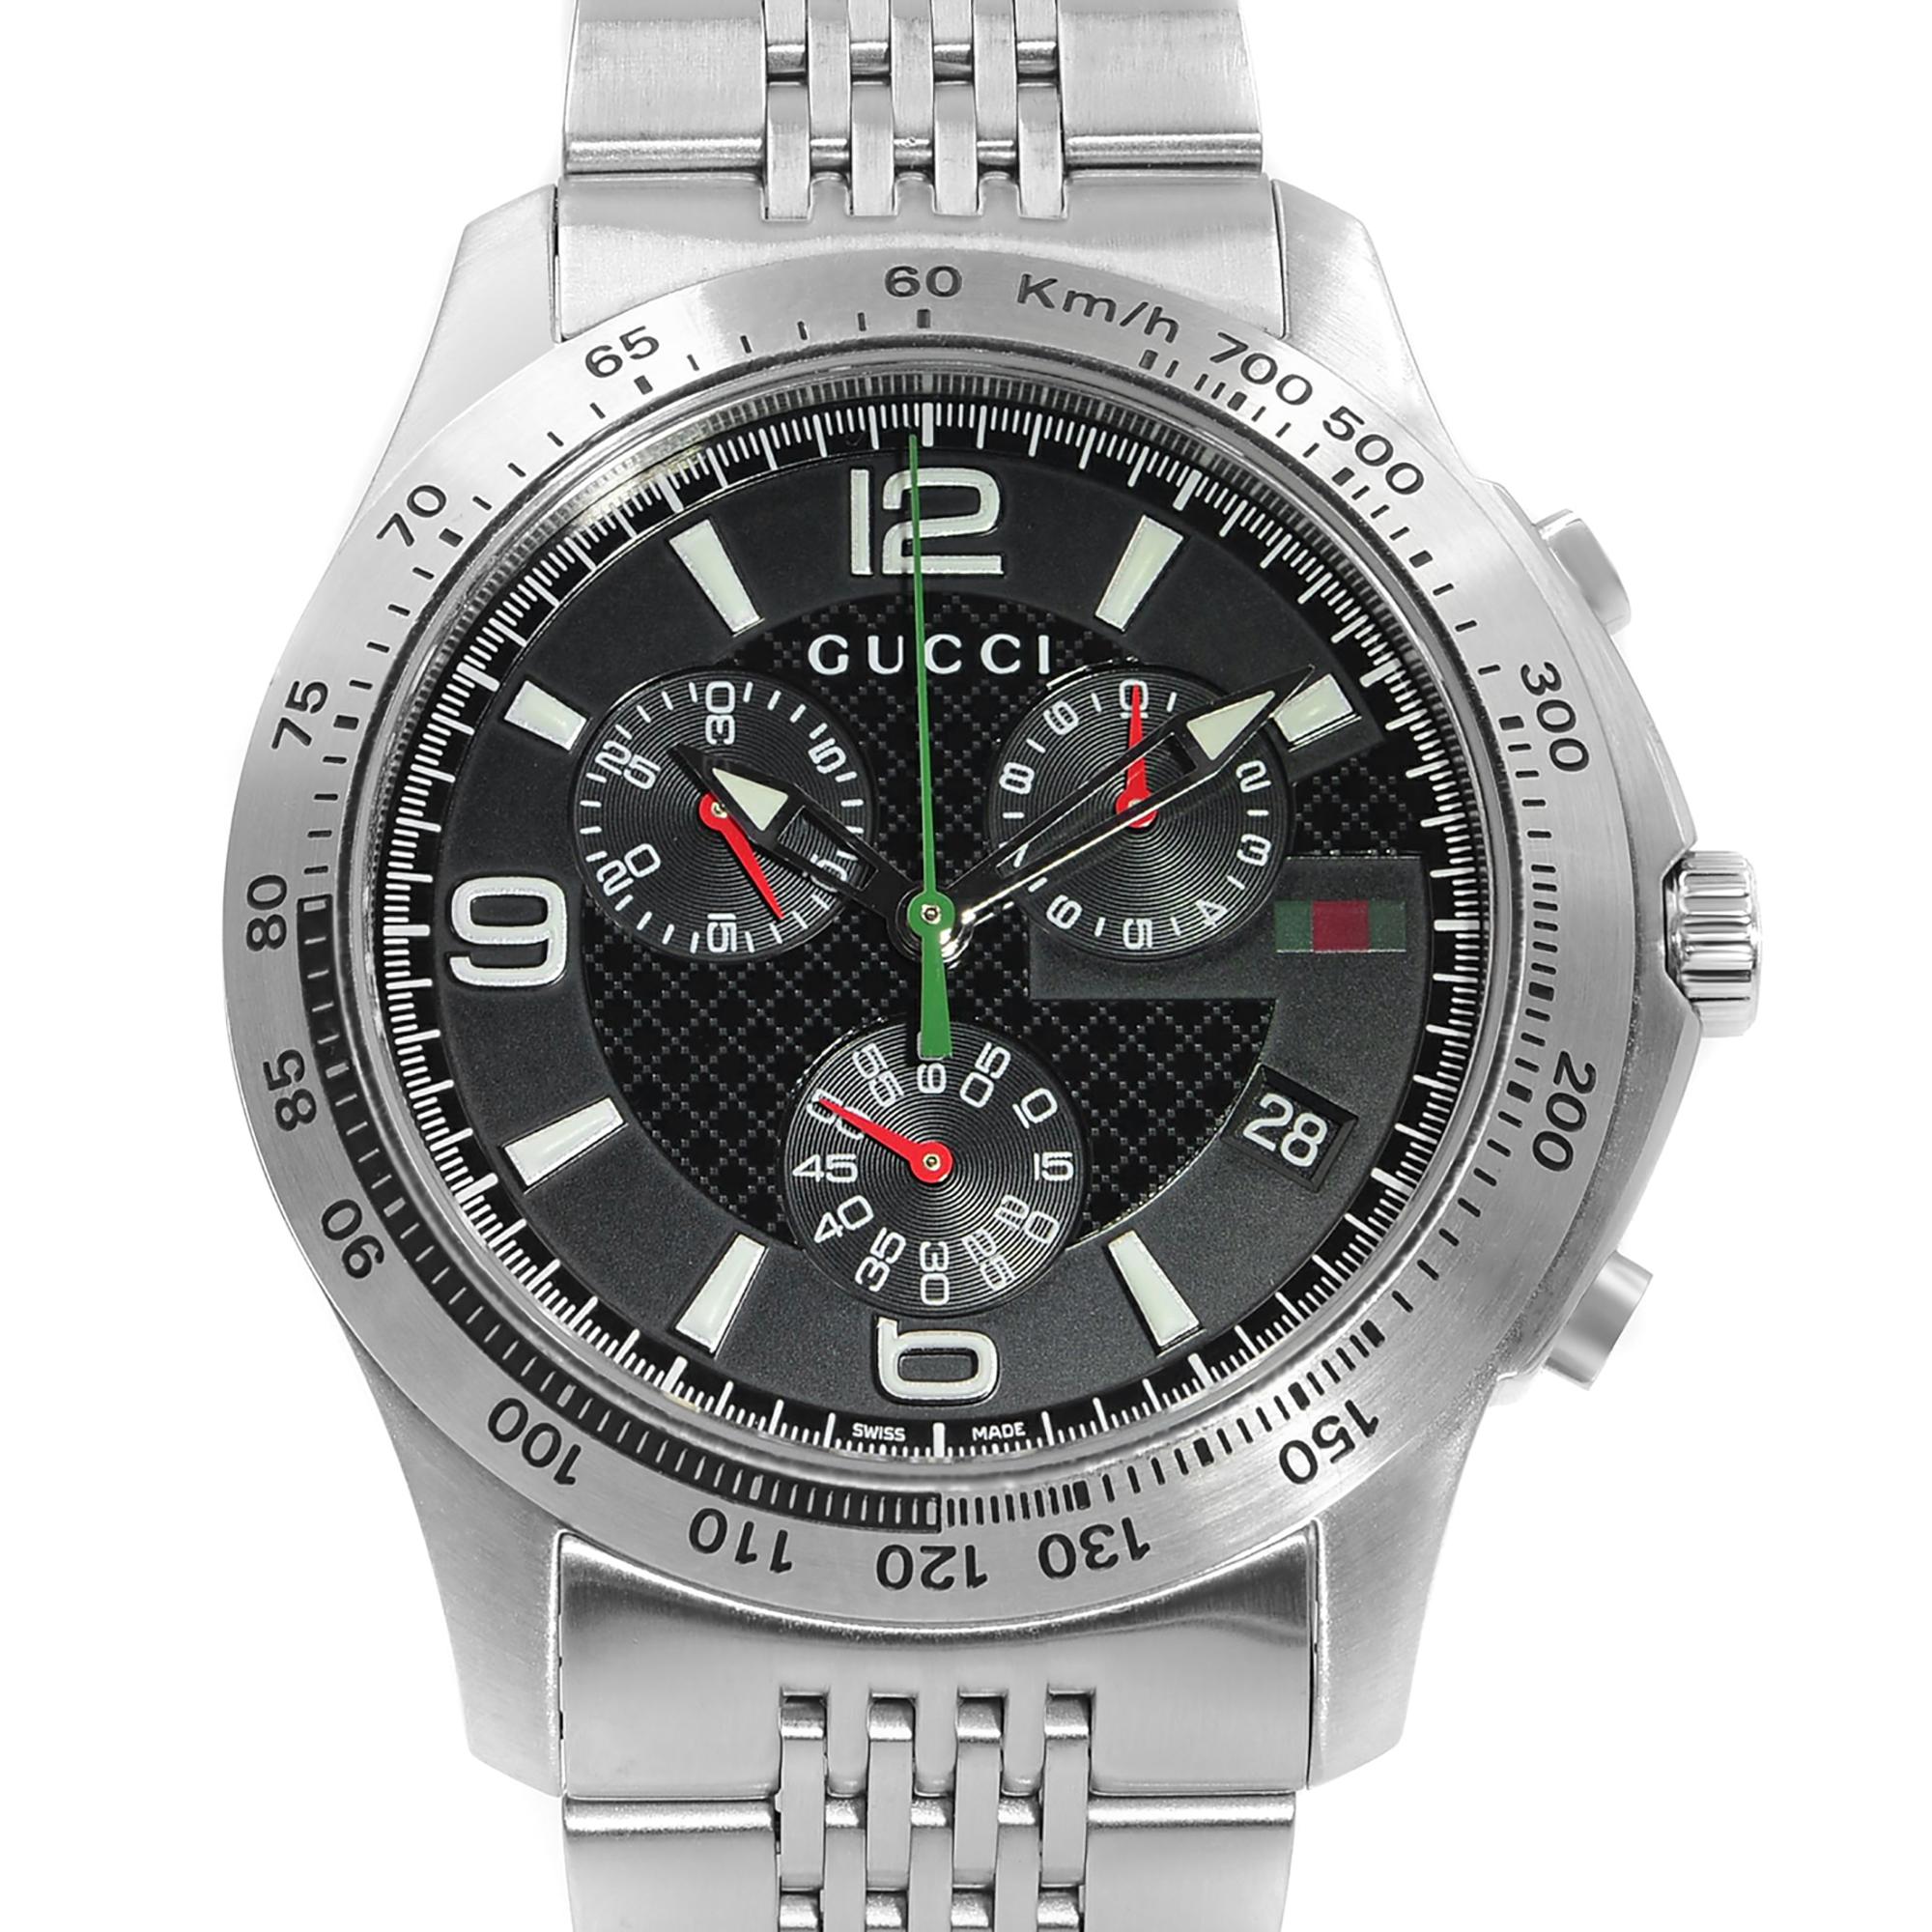 This display model Gucci 126 YA126221  is a beautiful men's timepiece that is powered by quartz (battery) movement which is cased in a stainless steel case. It has a round shape face, chronograph, date indicator, small seconds subdial, tachymeter